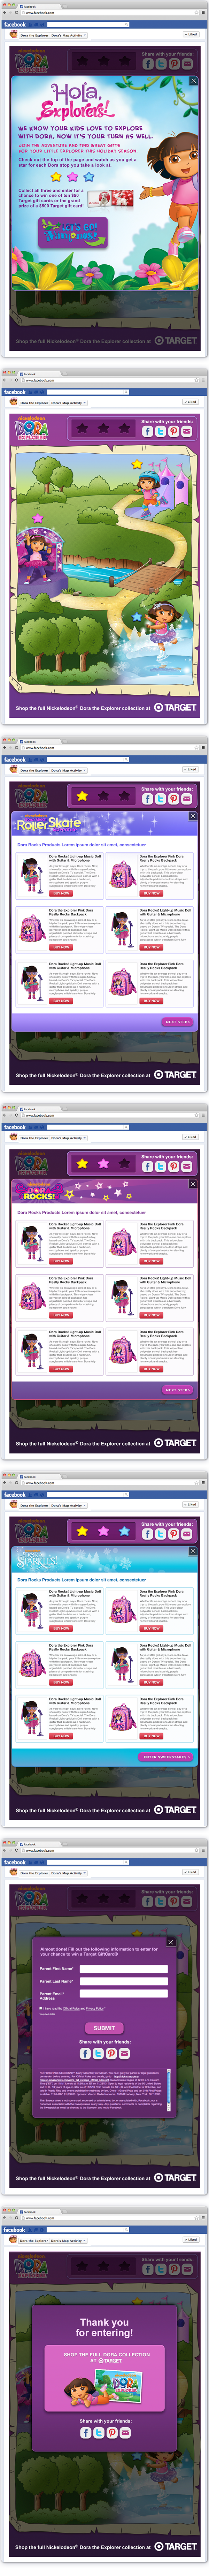 interactive application user experience kids nickelodeon Dora the Explorer target Promotion